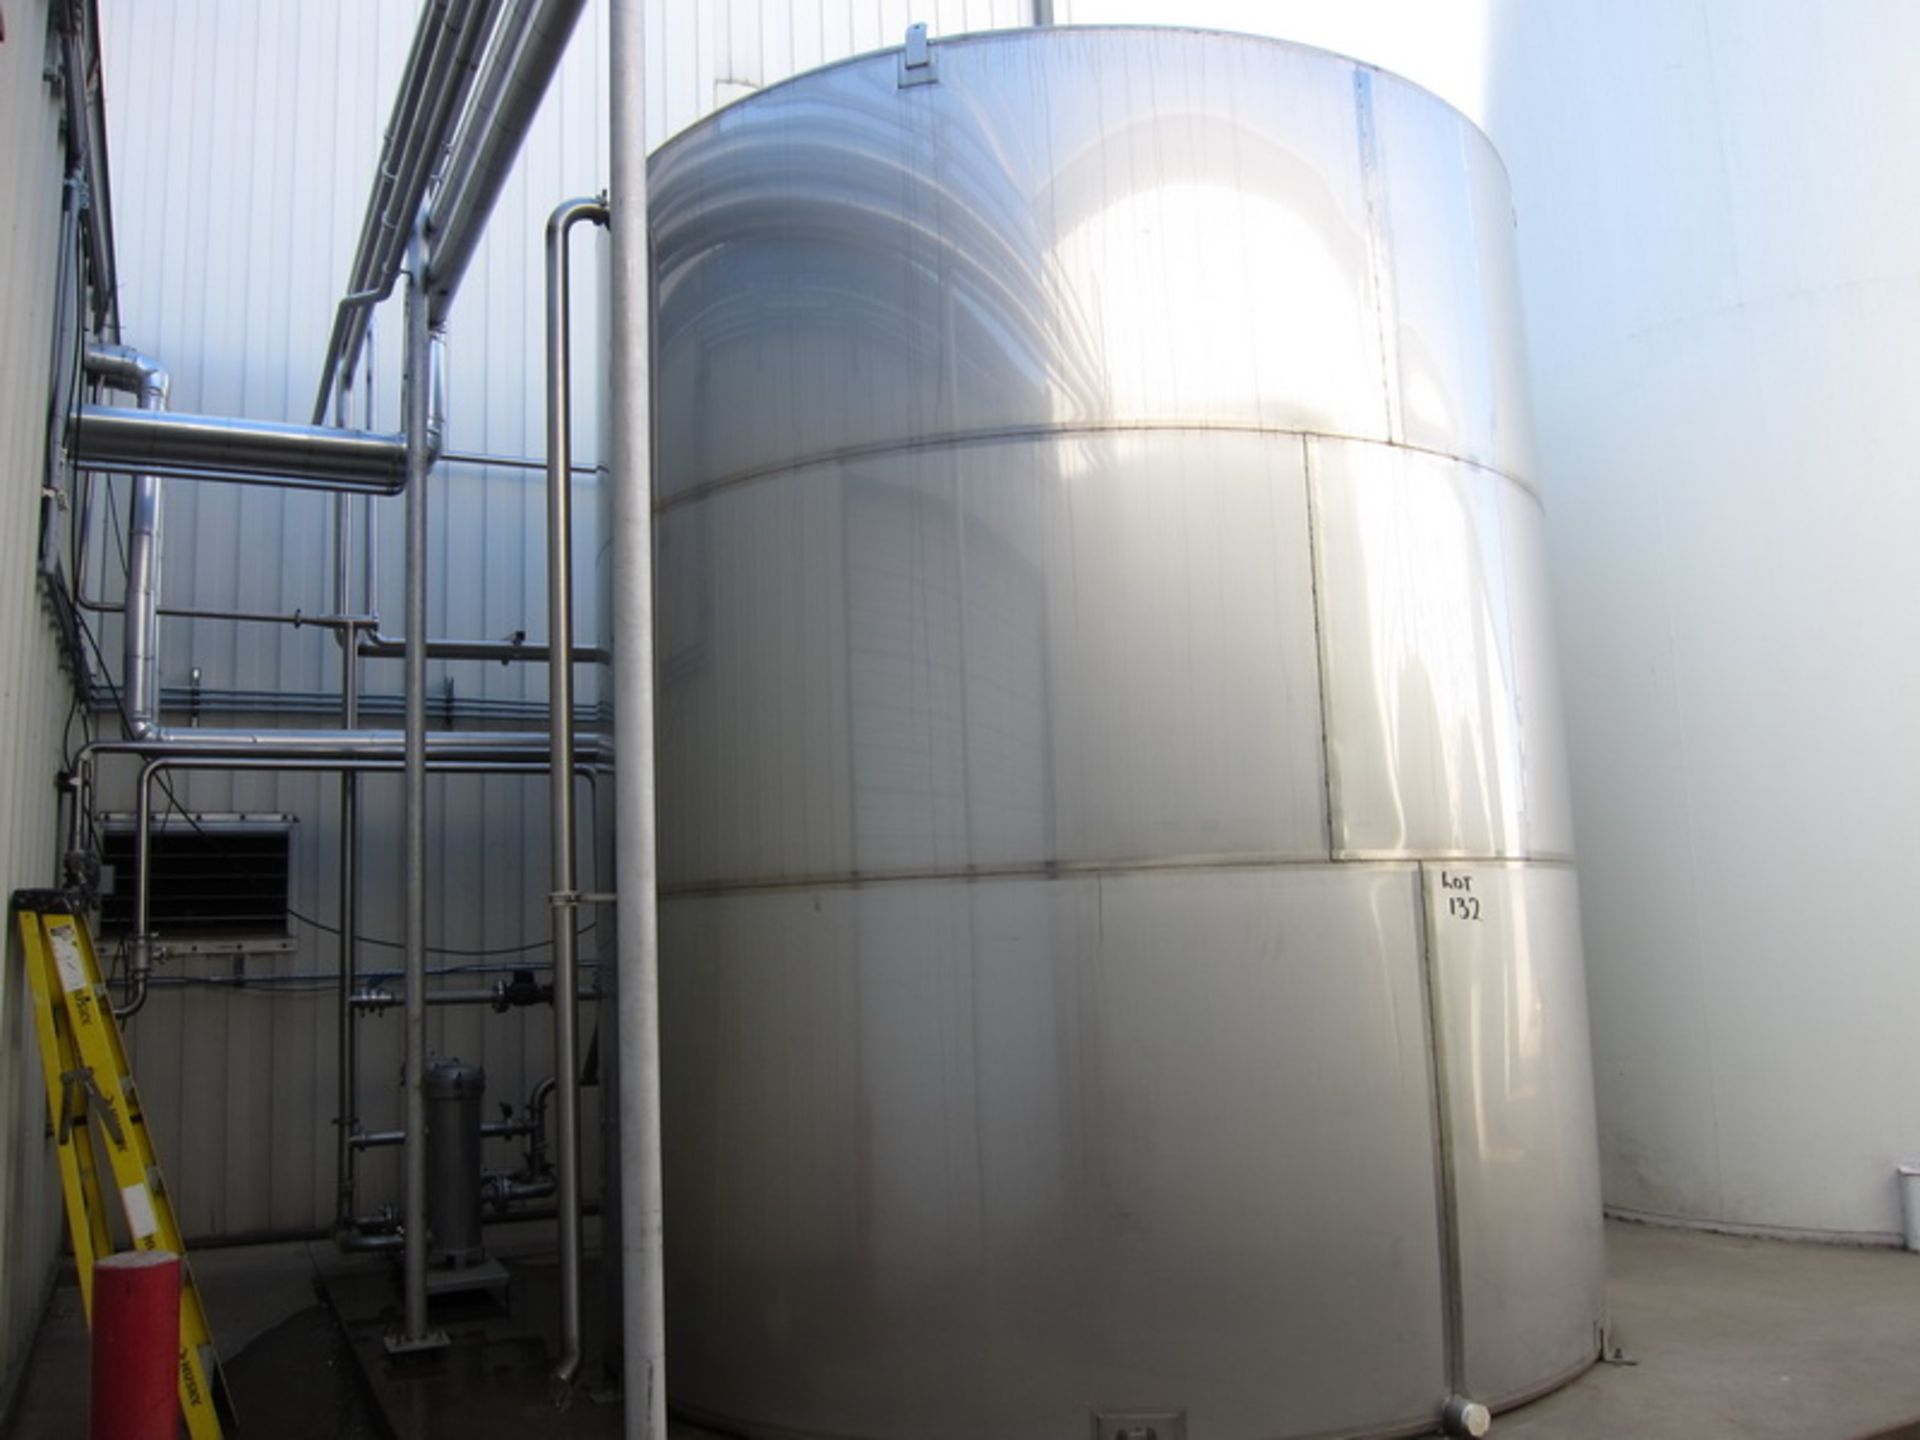 Hot water holding tank, SS 15,000 gallons approx. capacity, with (2) pumps & (2) USF Filtration